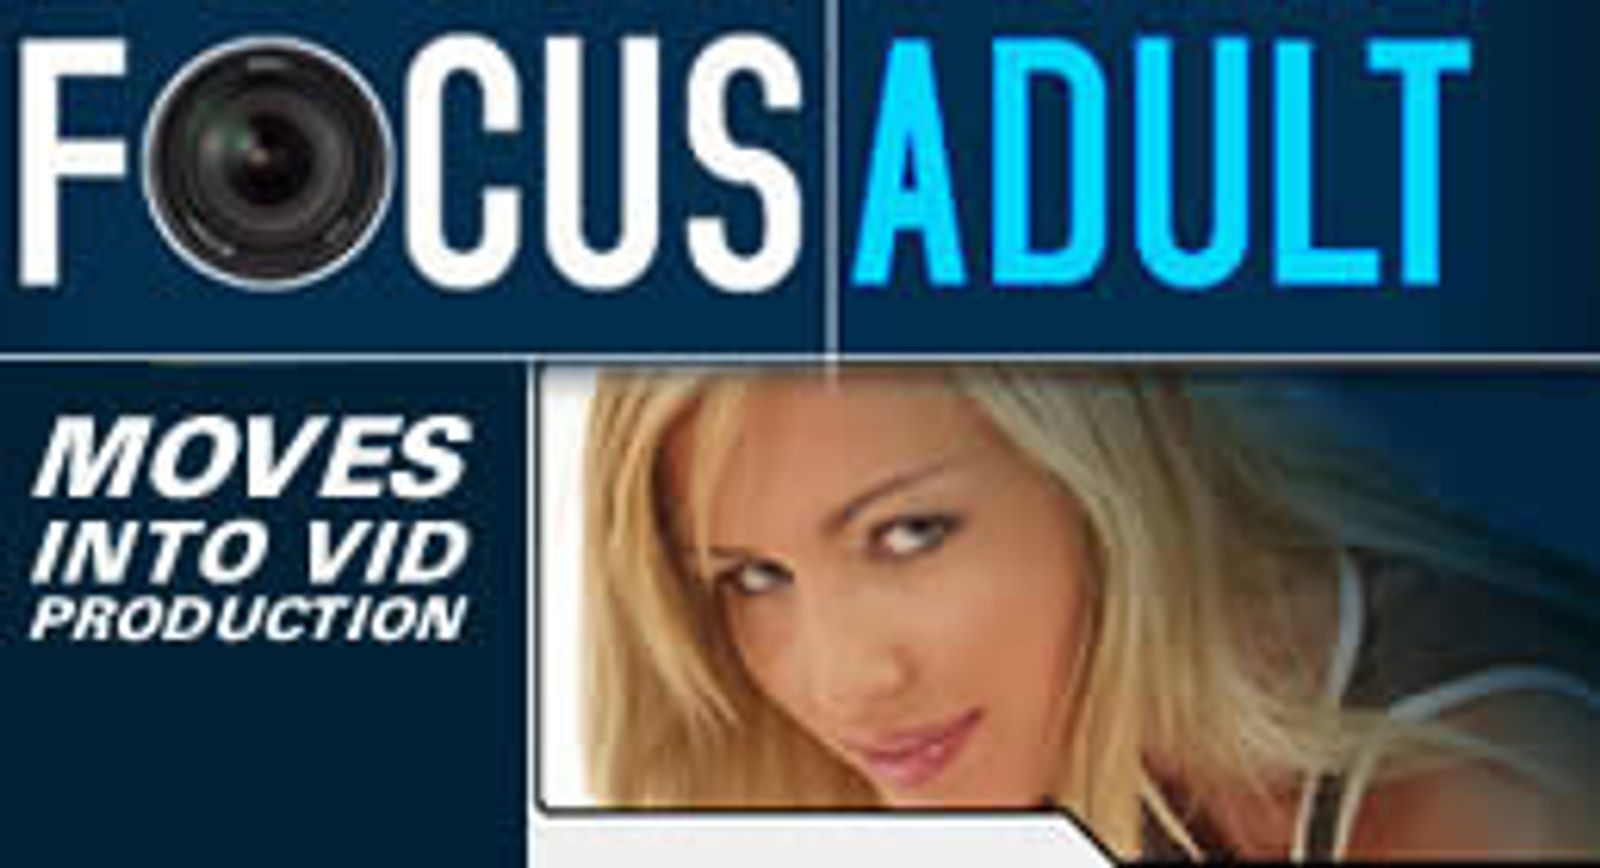 Focus|Adult Moving Into Vid Production